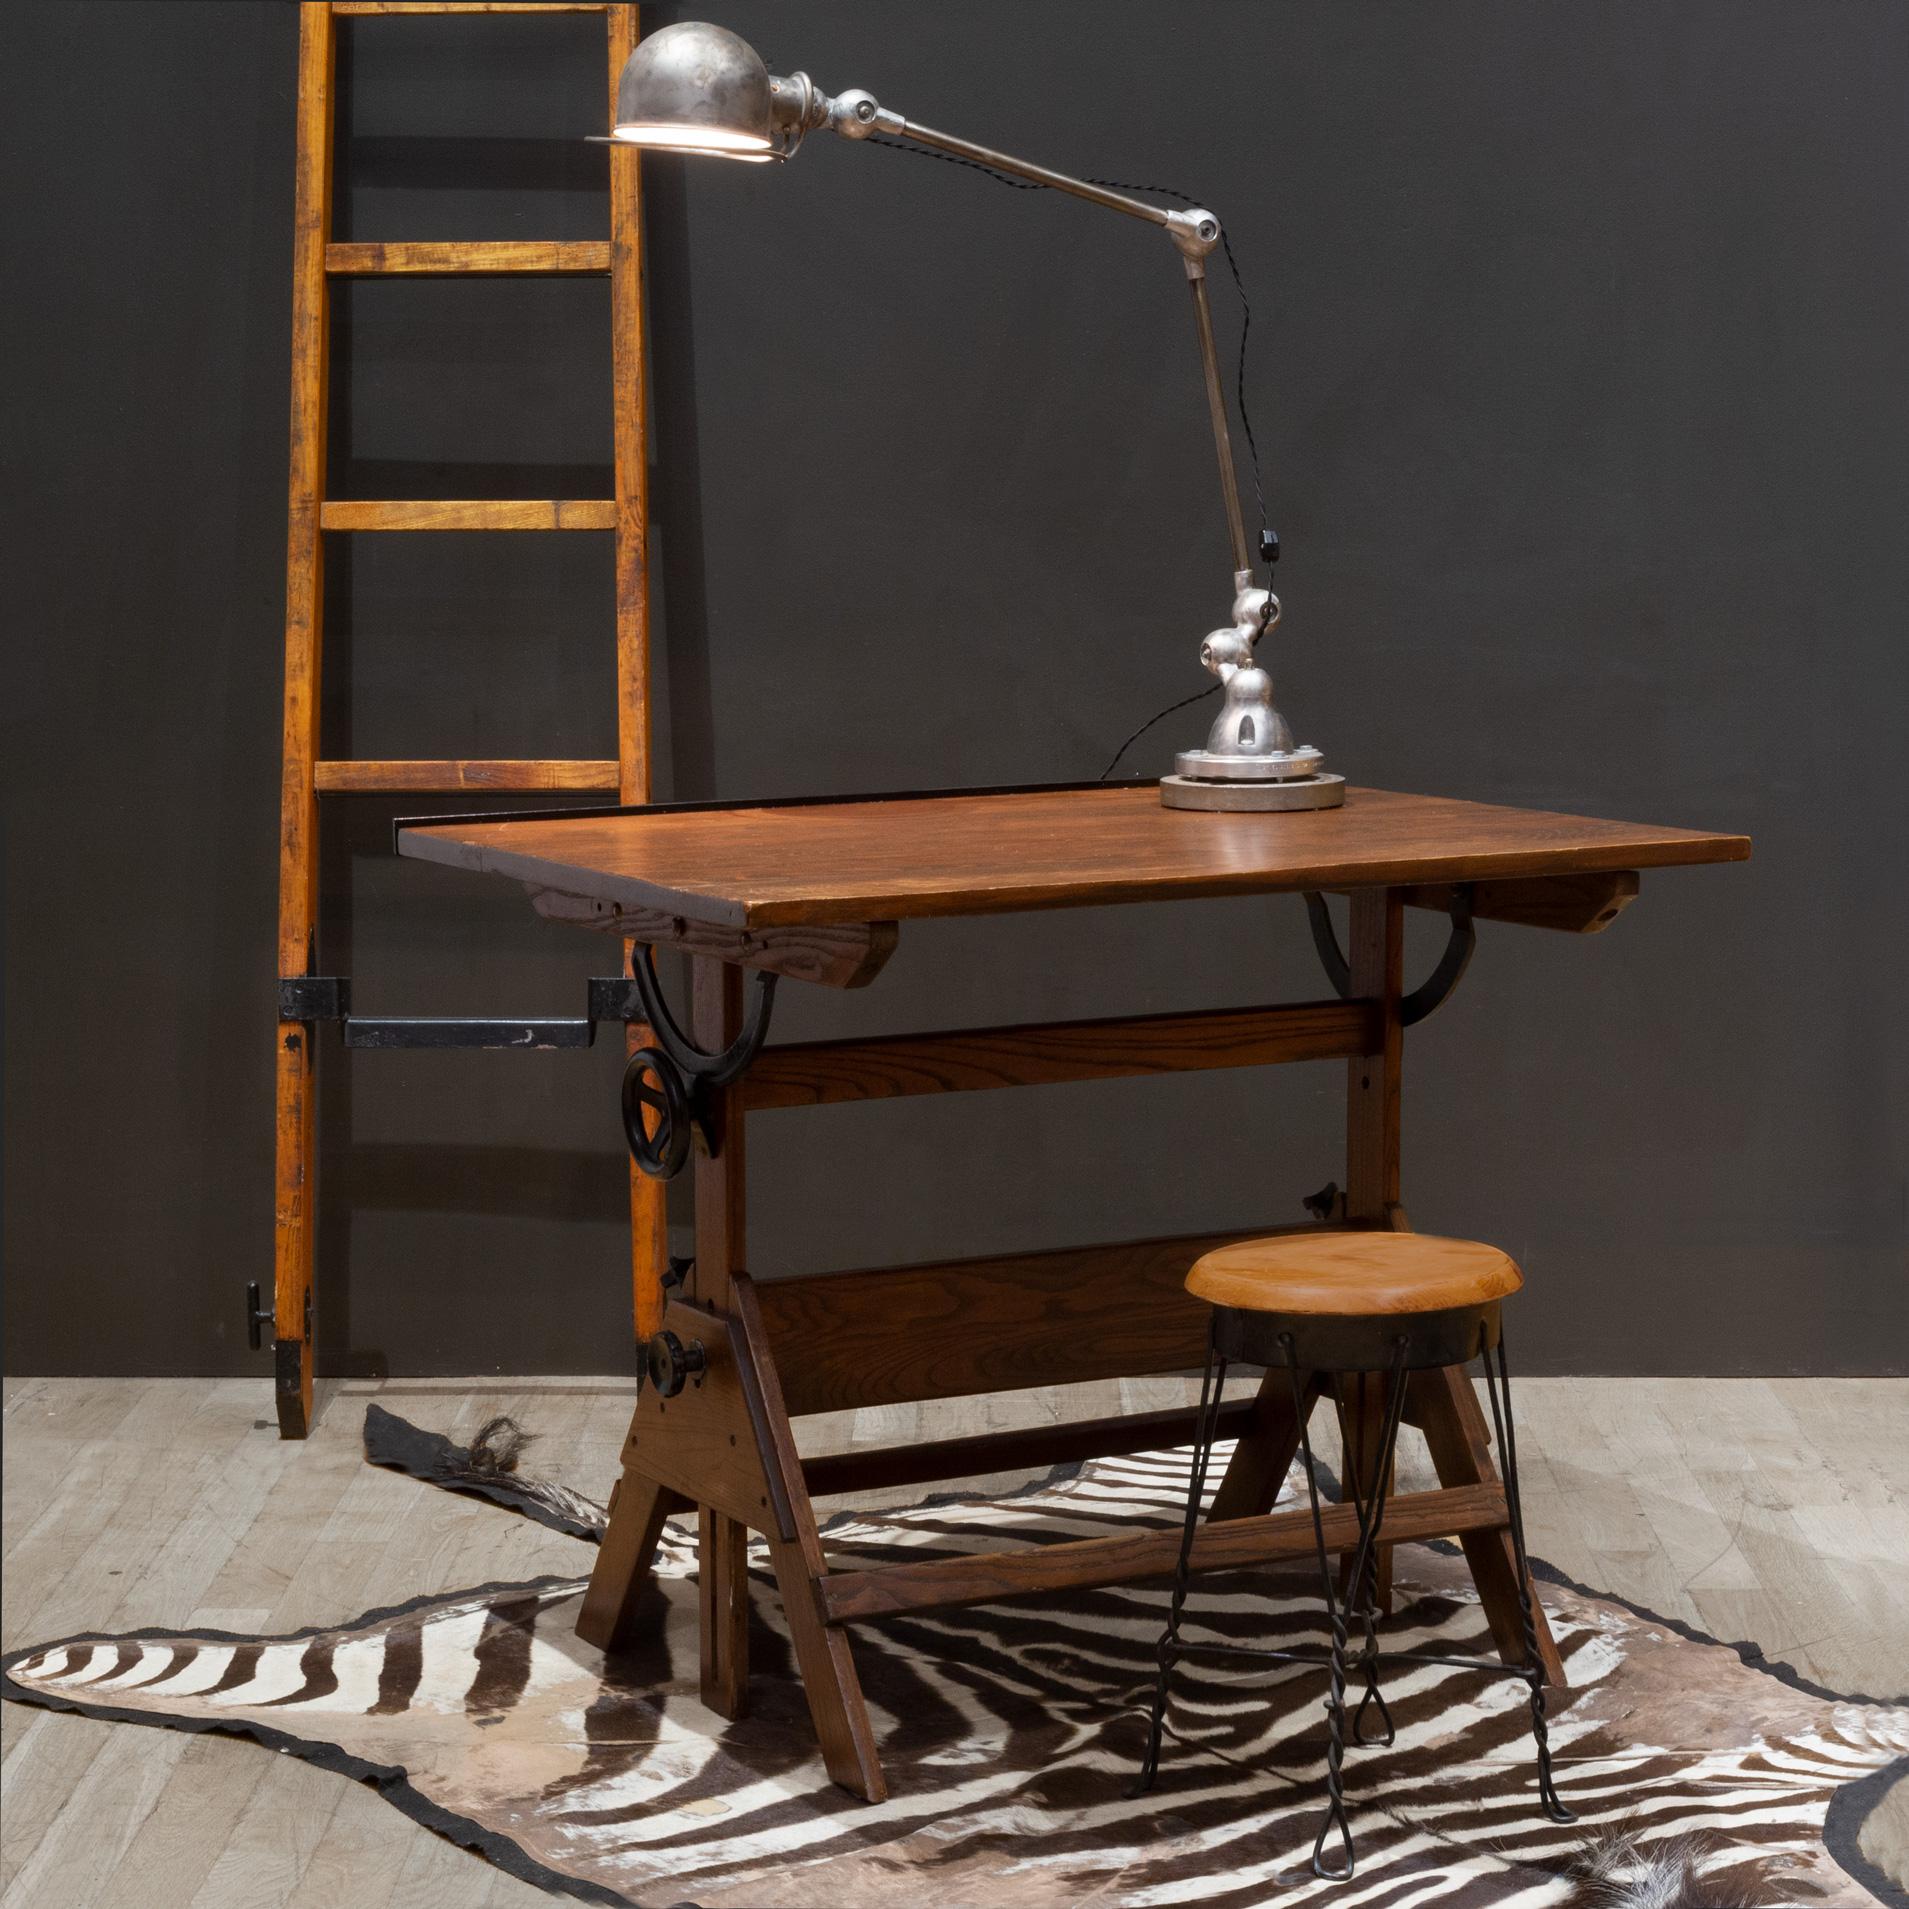 ABOUT

A fully adjustable industrial wooden drafting table with a cast iron ledge, cast iron knobs and brackets. The table can be used as a tall dining table, standing desk or drafting table. The top swivels at any angle and from either side. The